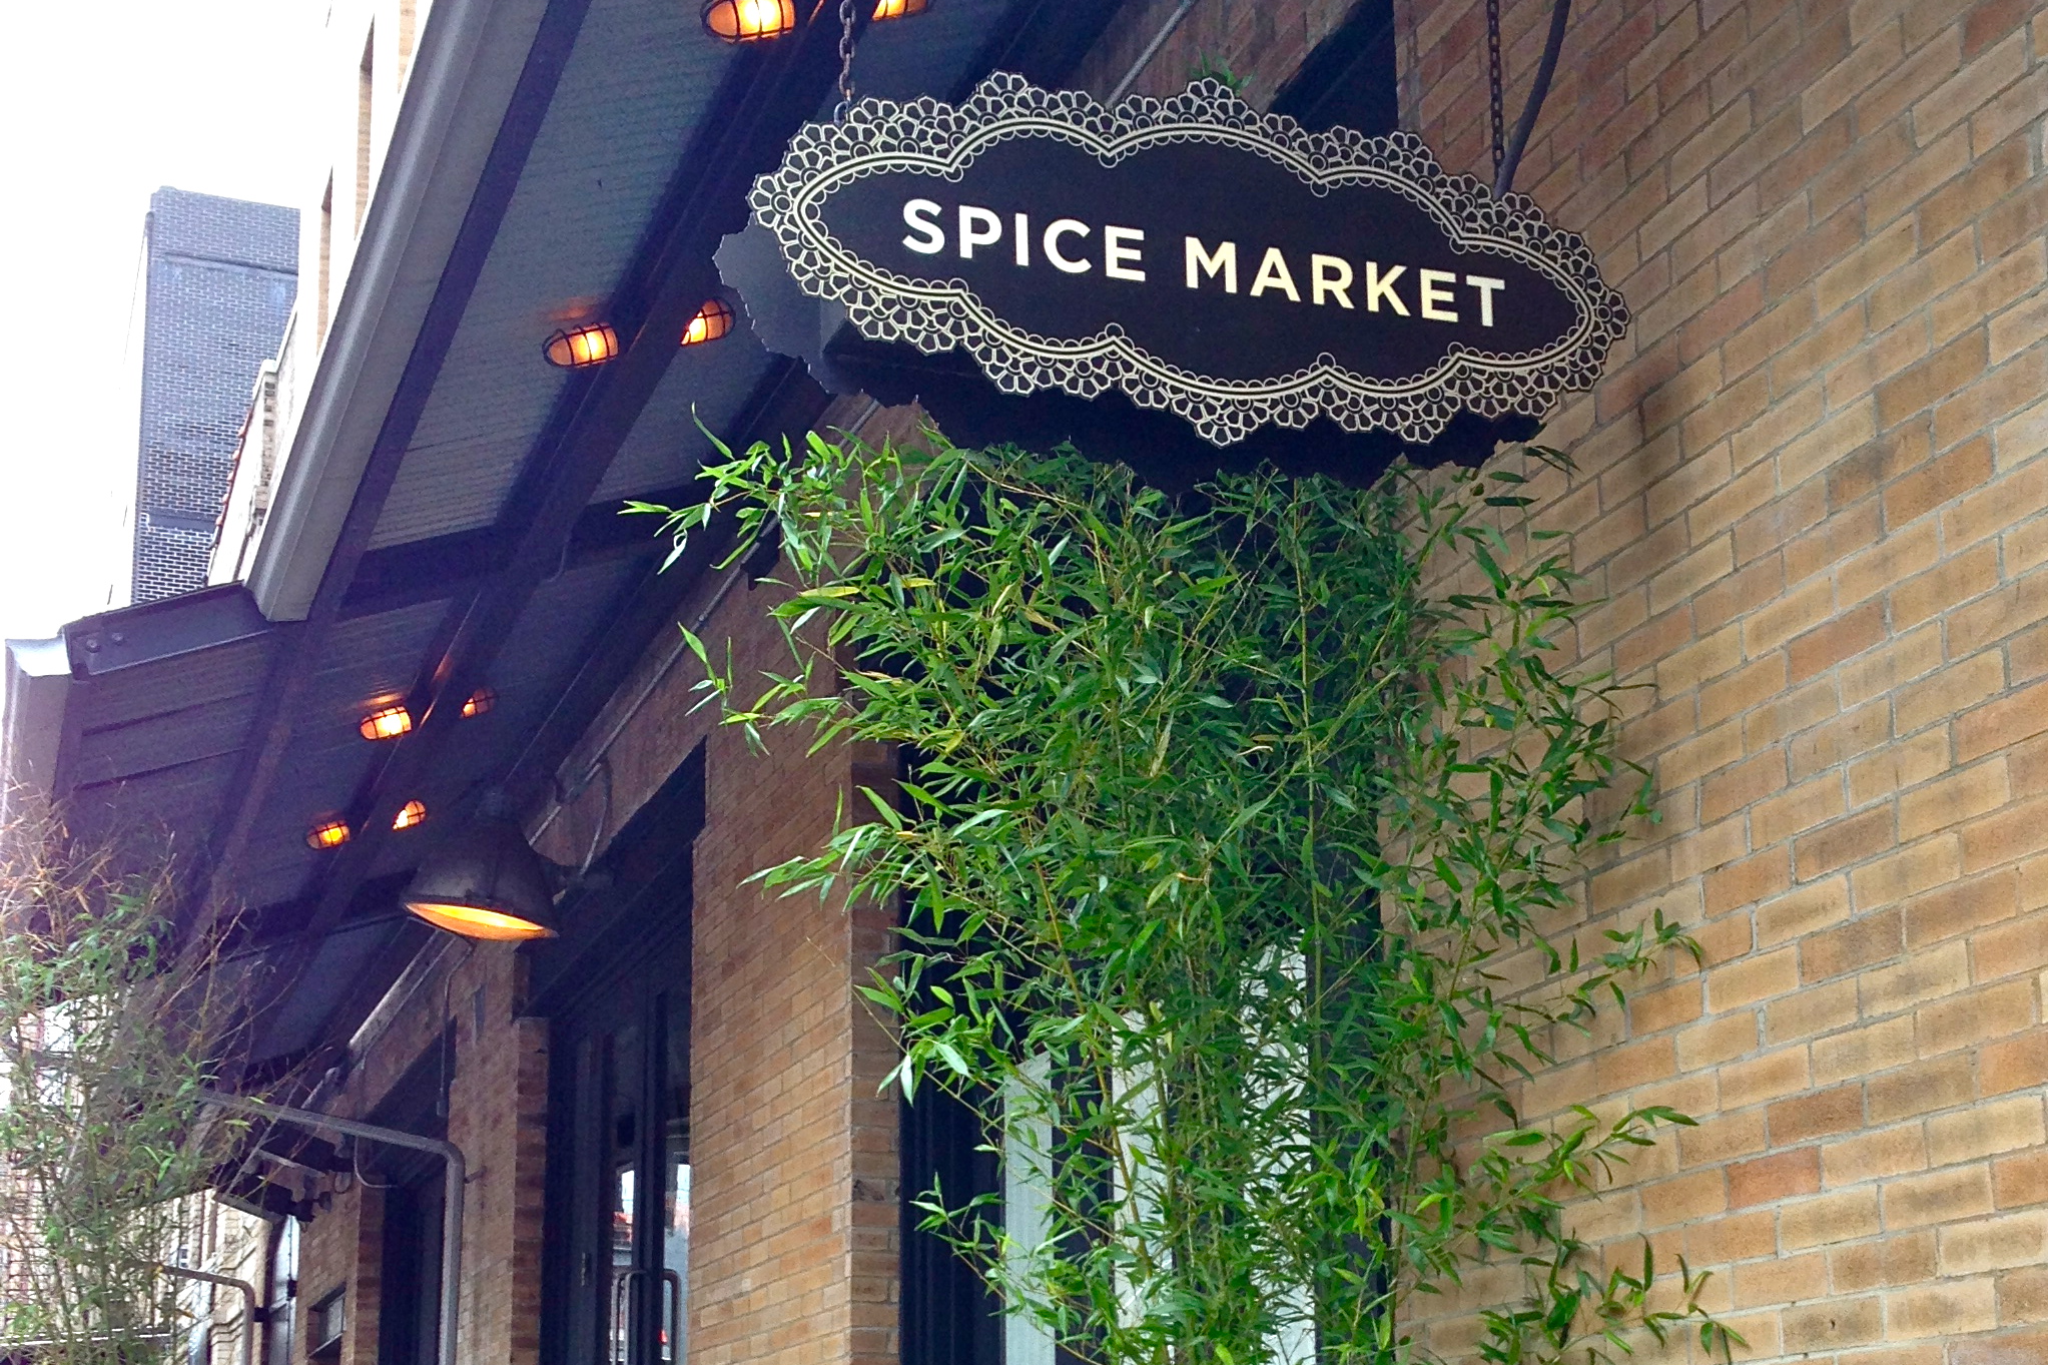 Famous chef Jean-Georges is opening a members-only club where Spice Market used to be